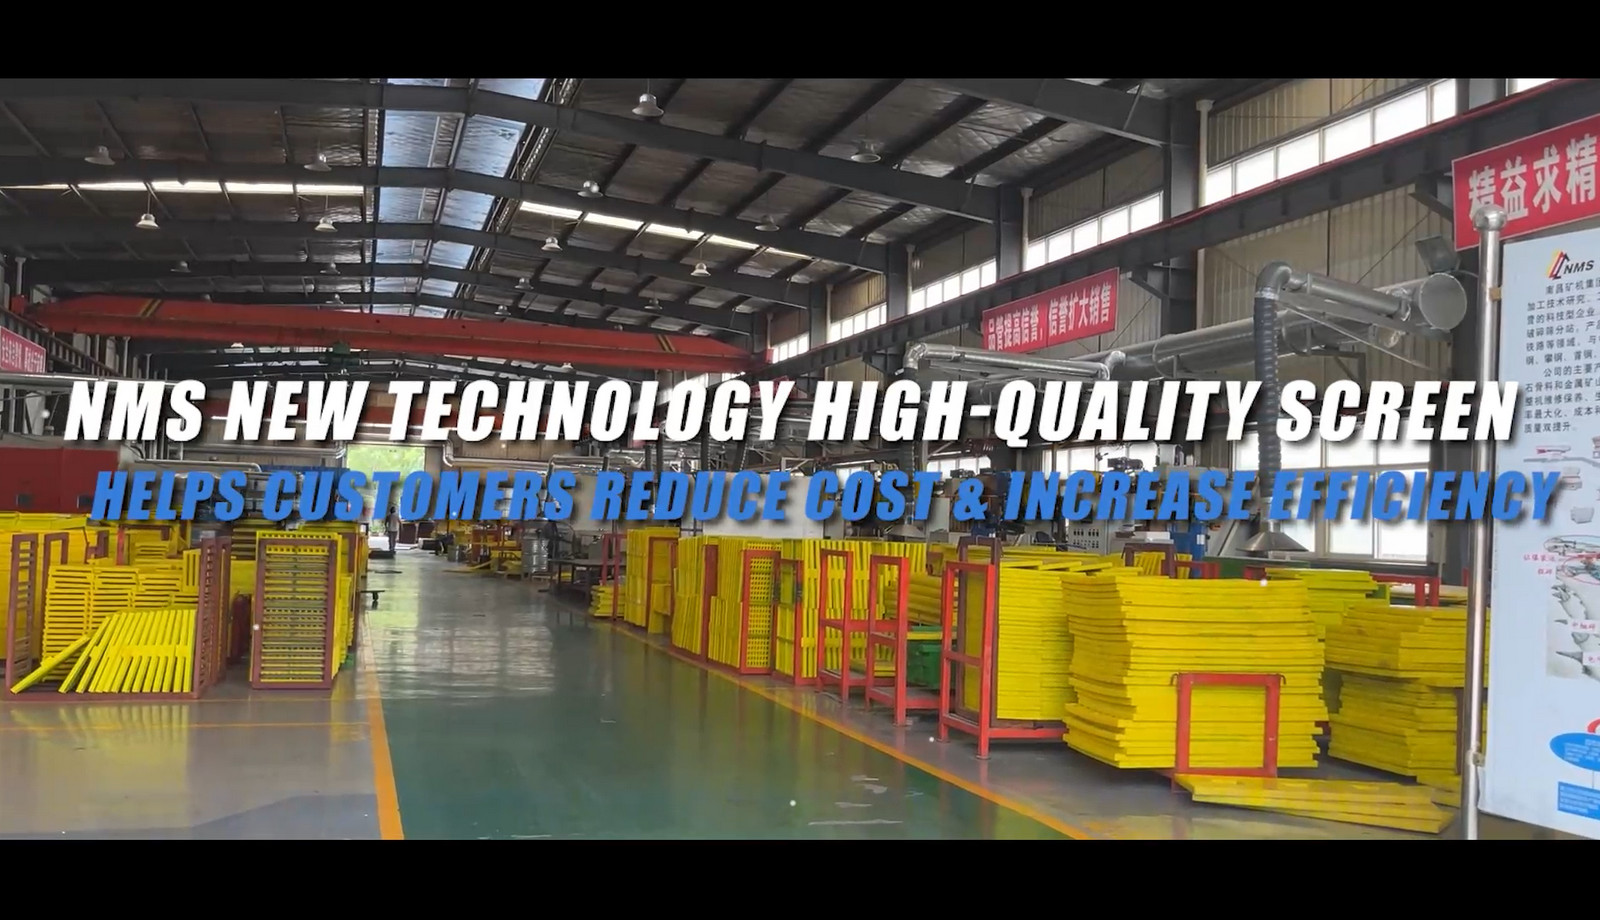 NMS New Technology High-quality Screen Helps Customers Reduce Cost & Increase Efficiency